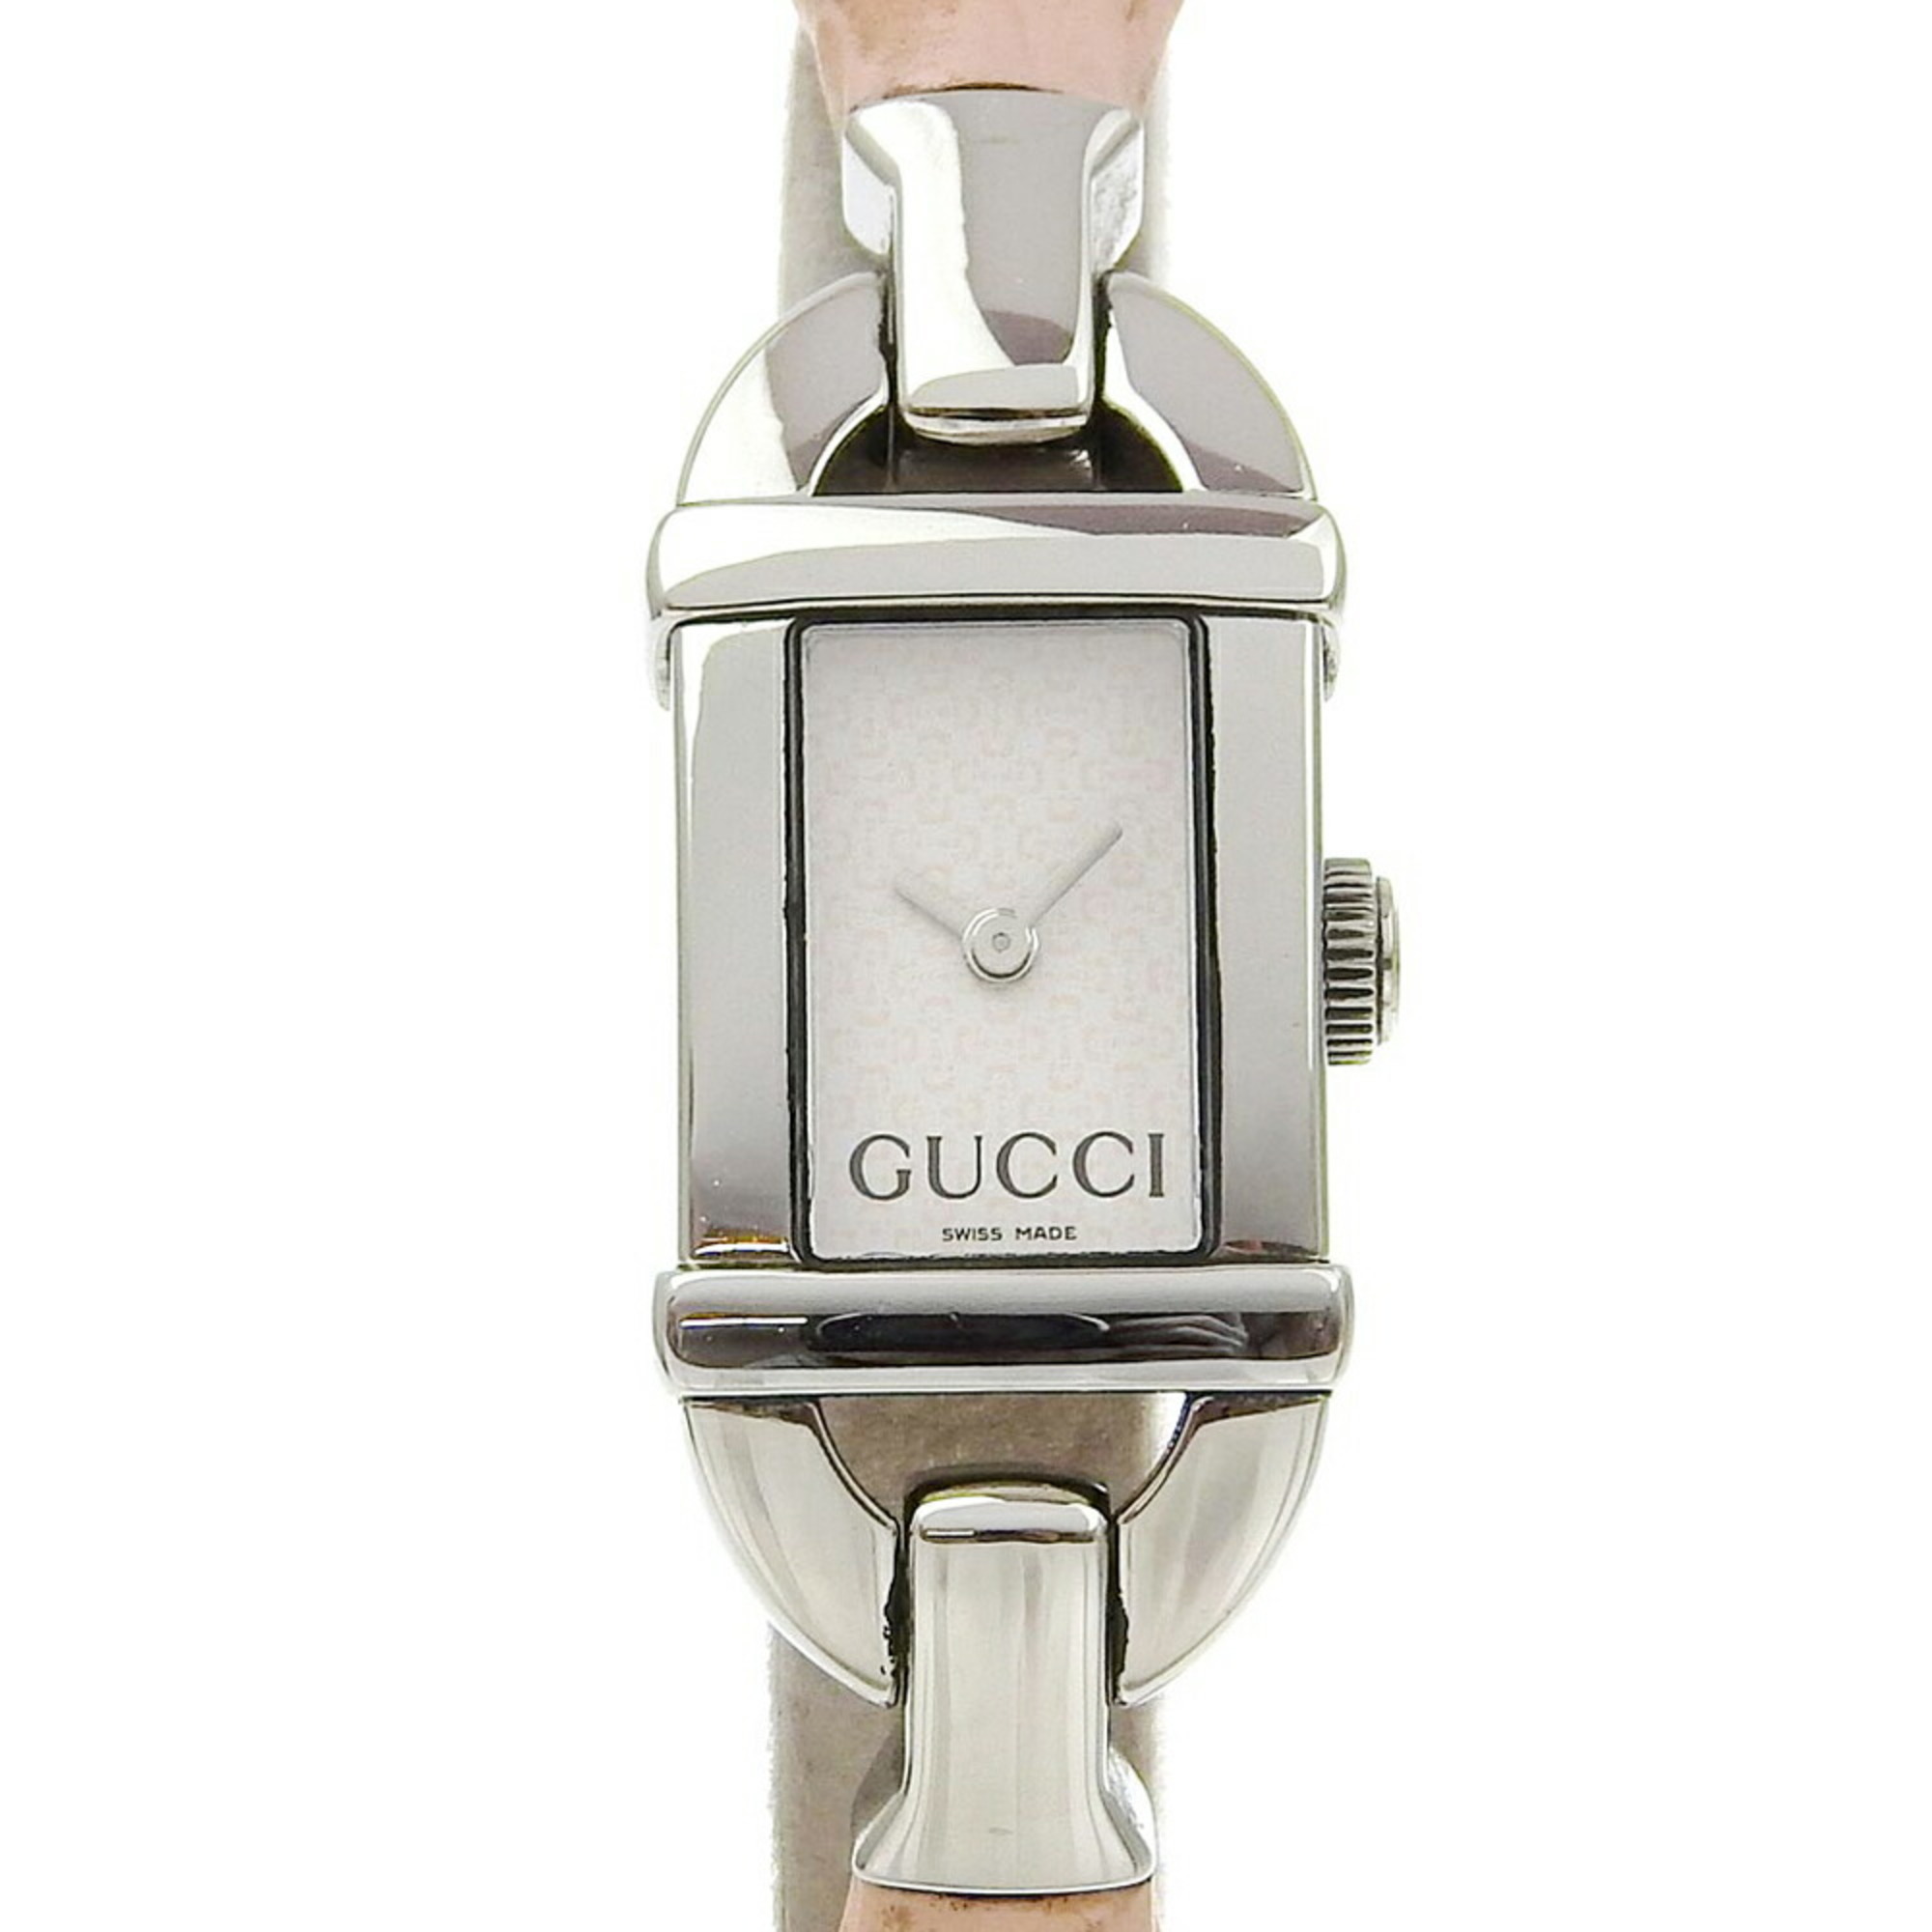 Gucci Bamboo Watch 6800L Stainless Steel x Rubber Pink Quartz Analog Display White Dial Women's